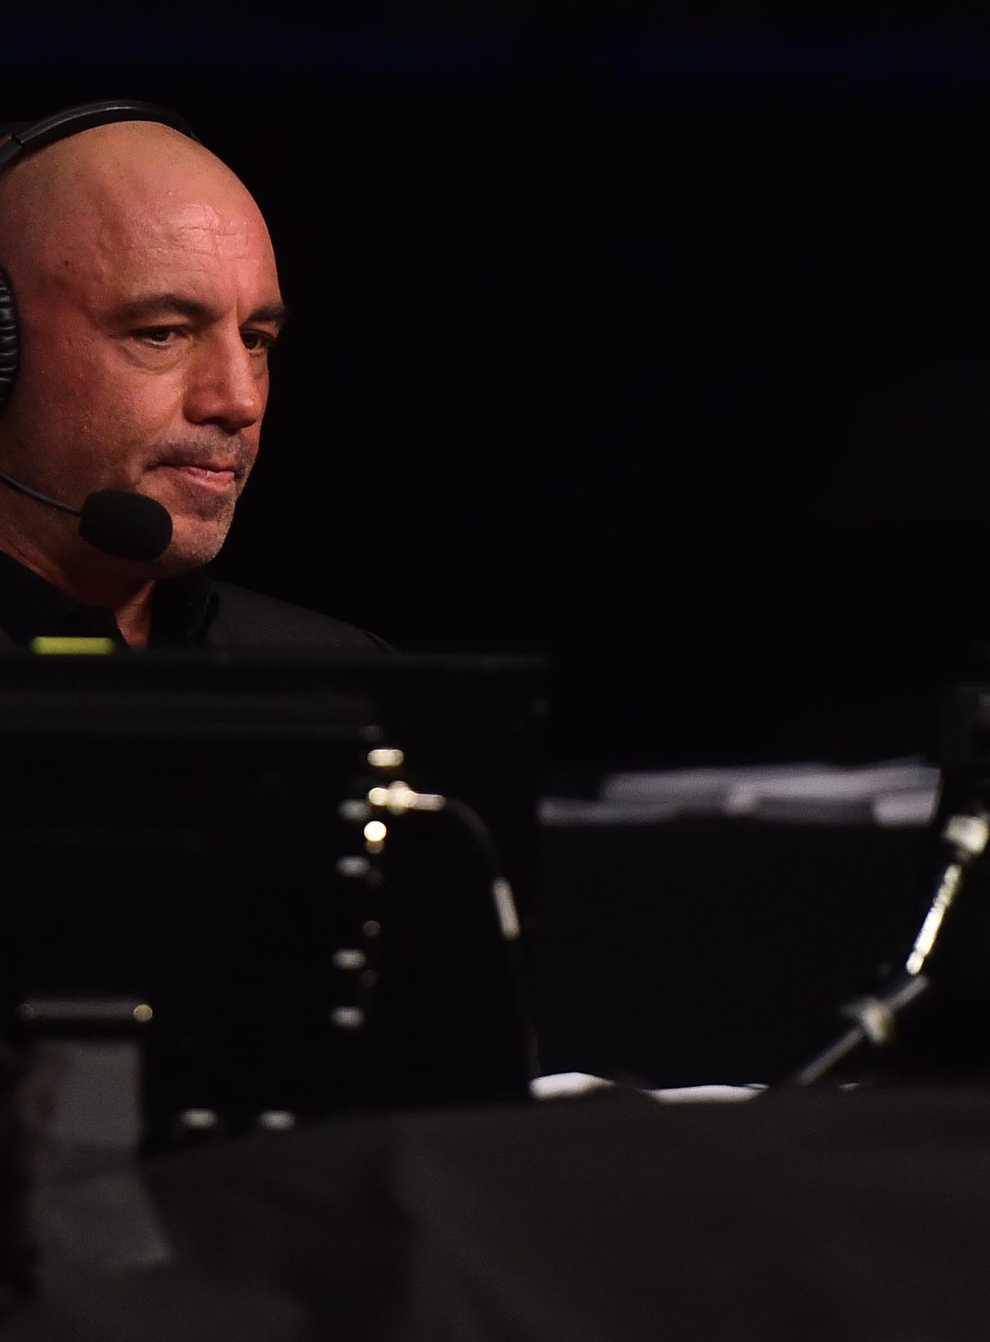 Rogan is also a commentator for the UFC 